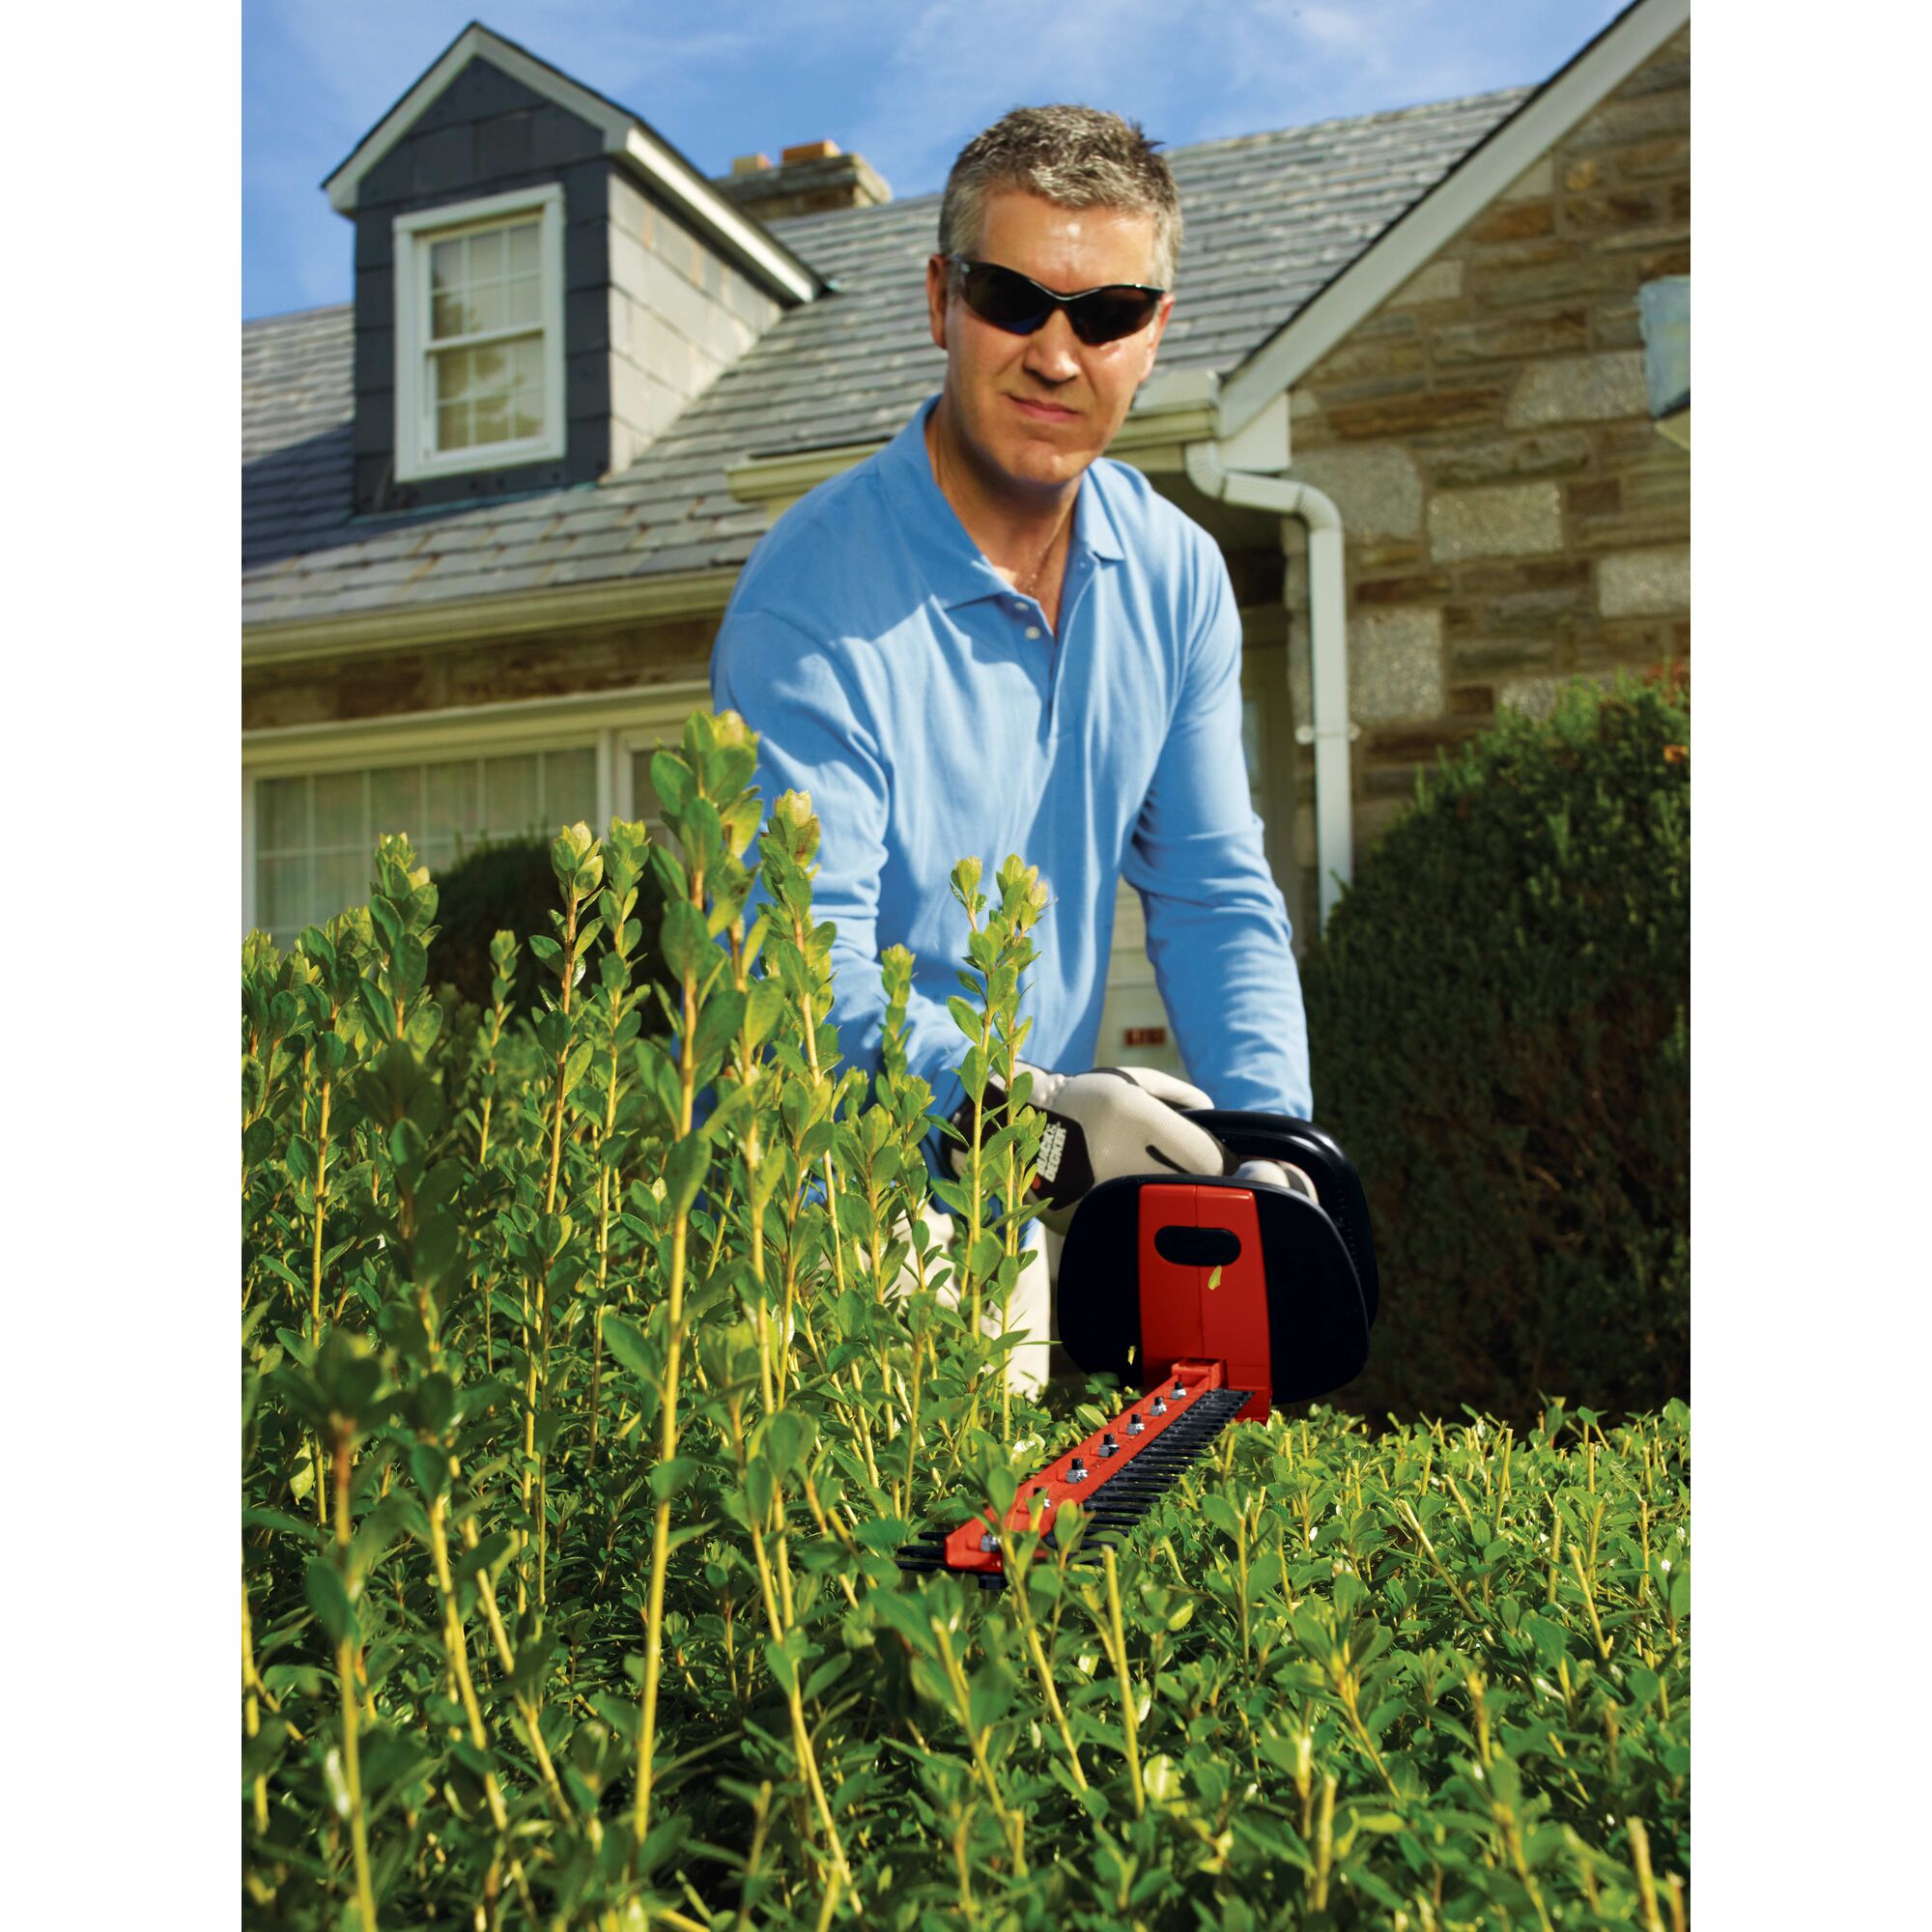 24 inch hedge trimmer with rotating handle being used by a person to trim a bush.